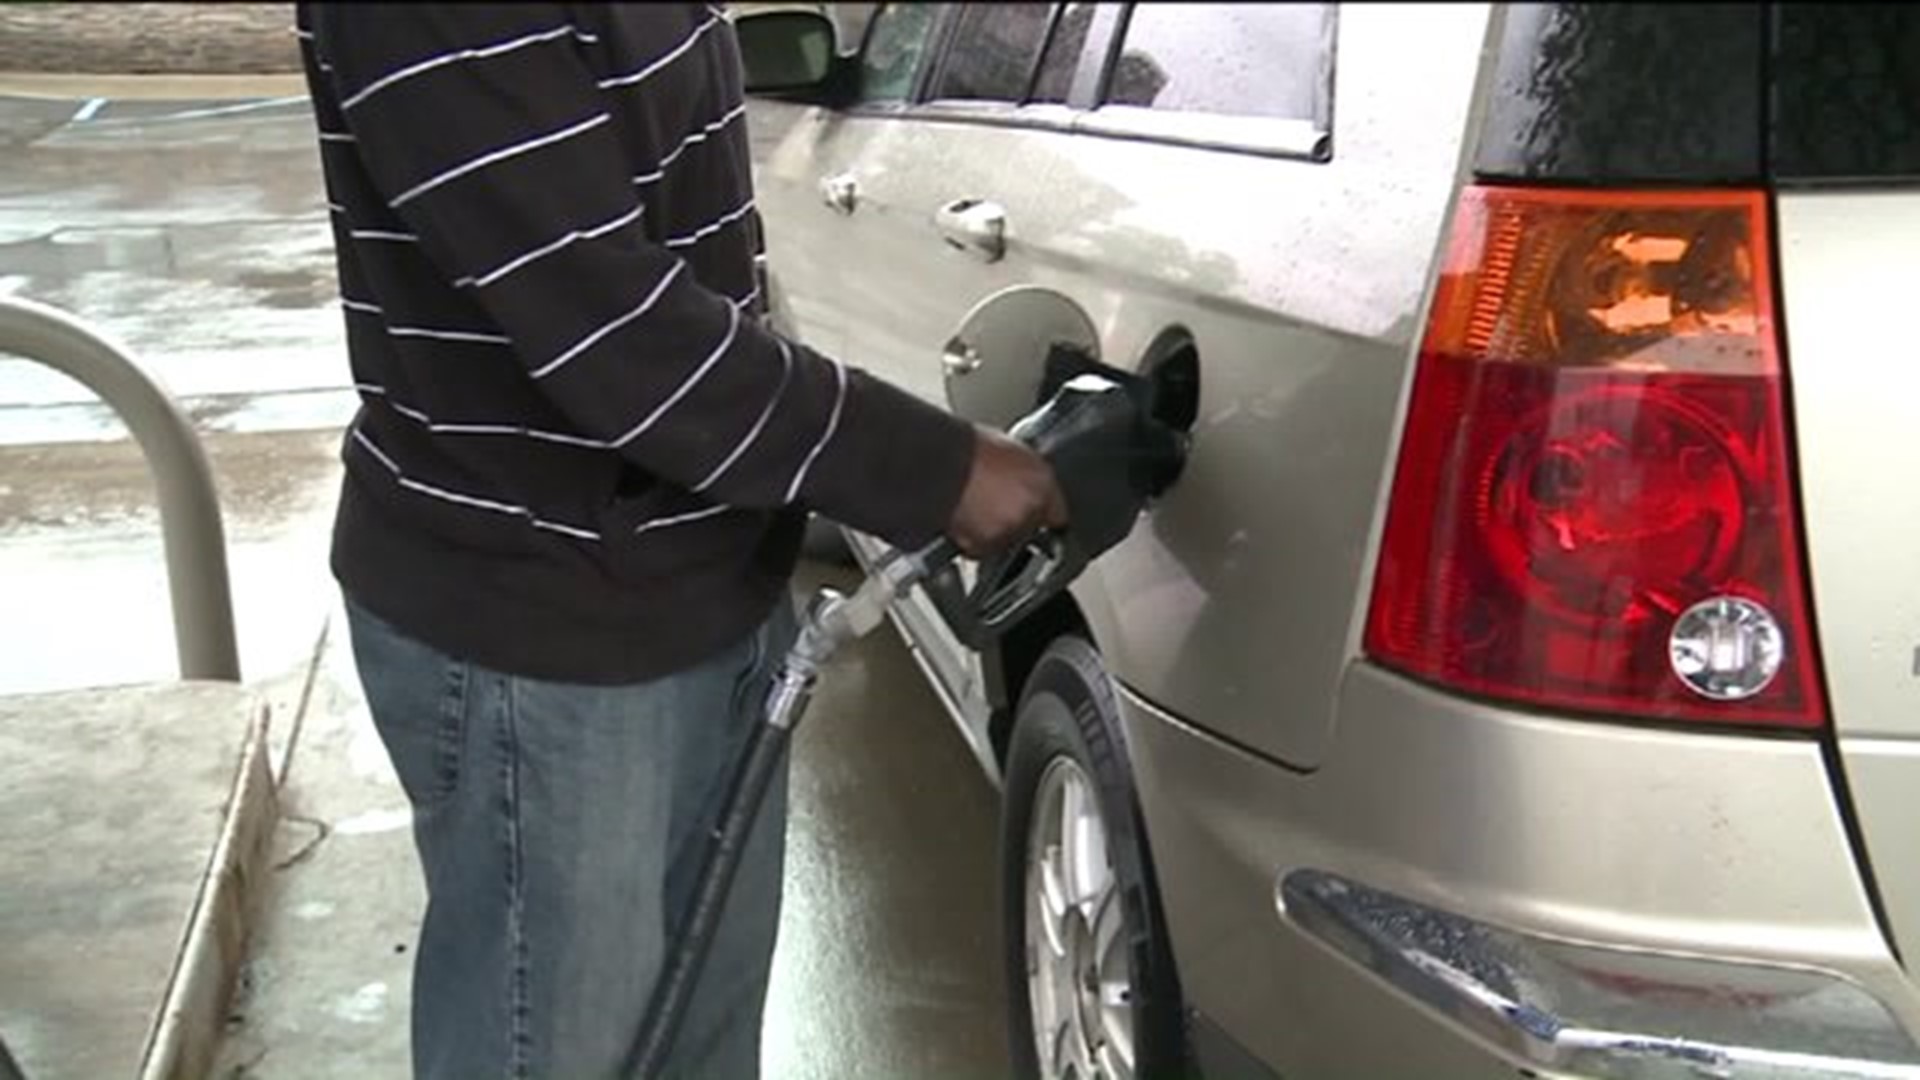 Lowest Fourth of July Gas Prices in Years